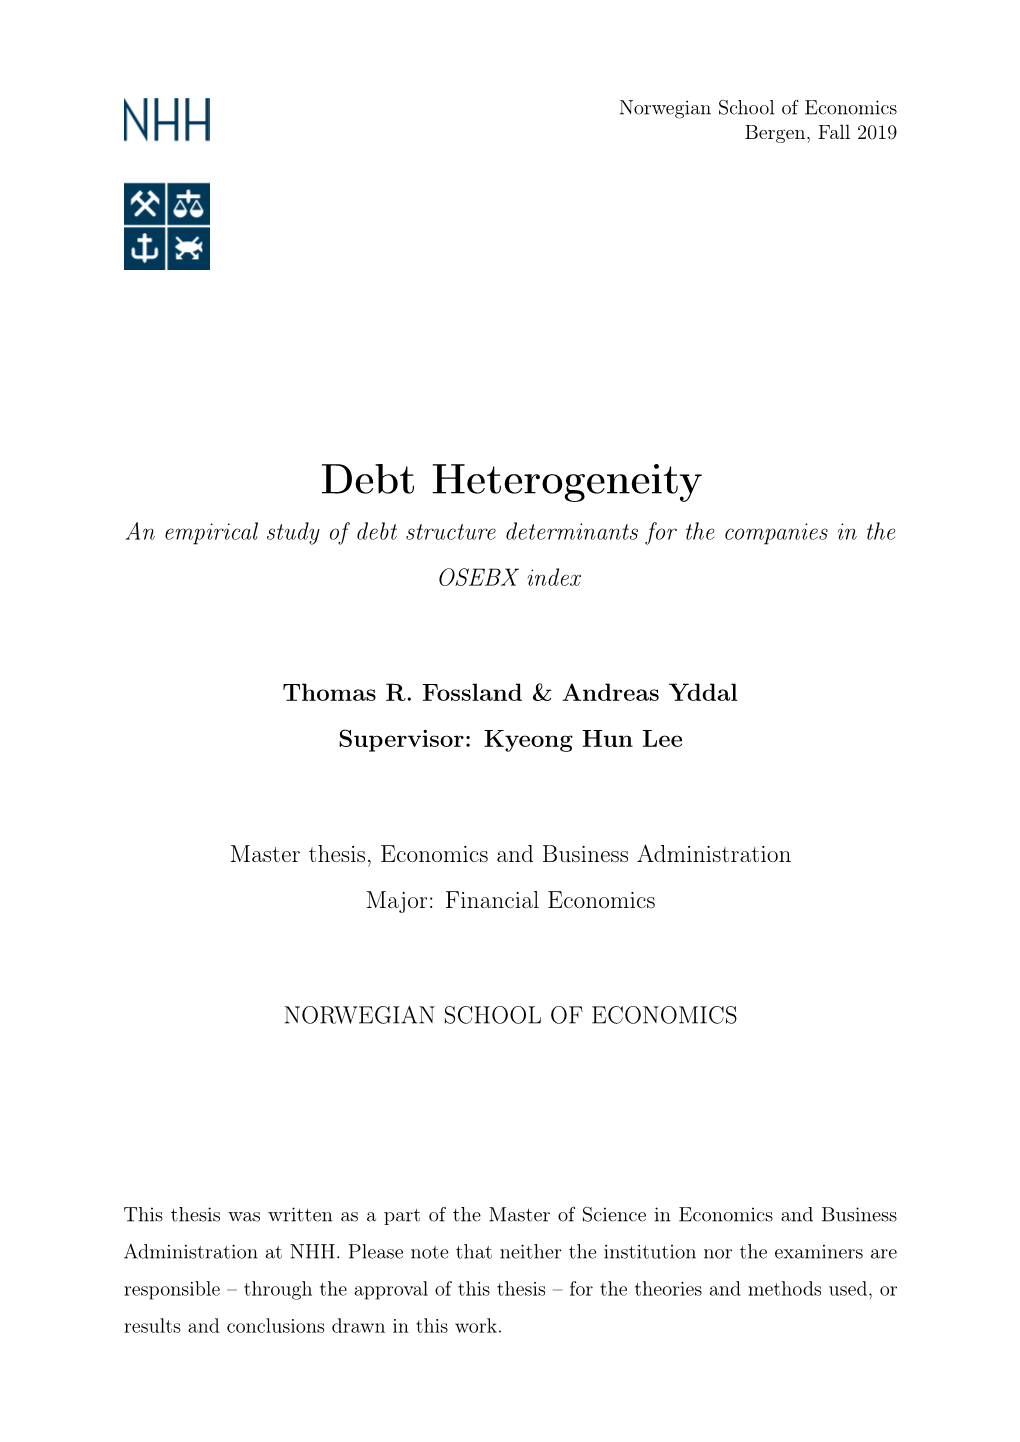 Debt Heterogeneity an Empirical Study of Debt Structure Determinants for the Companies in the OSEBX Index